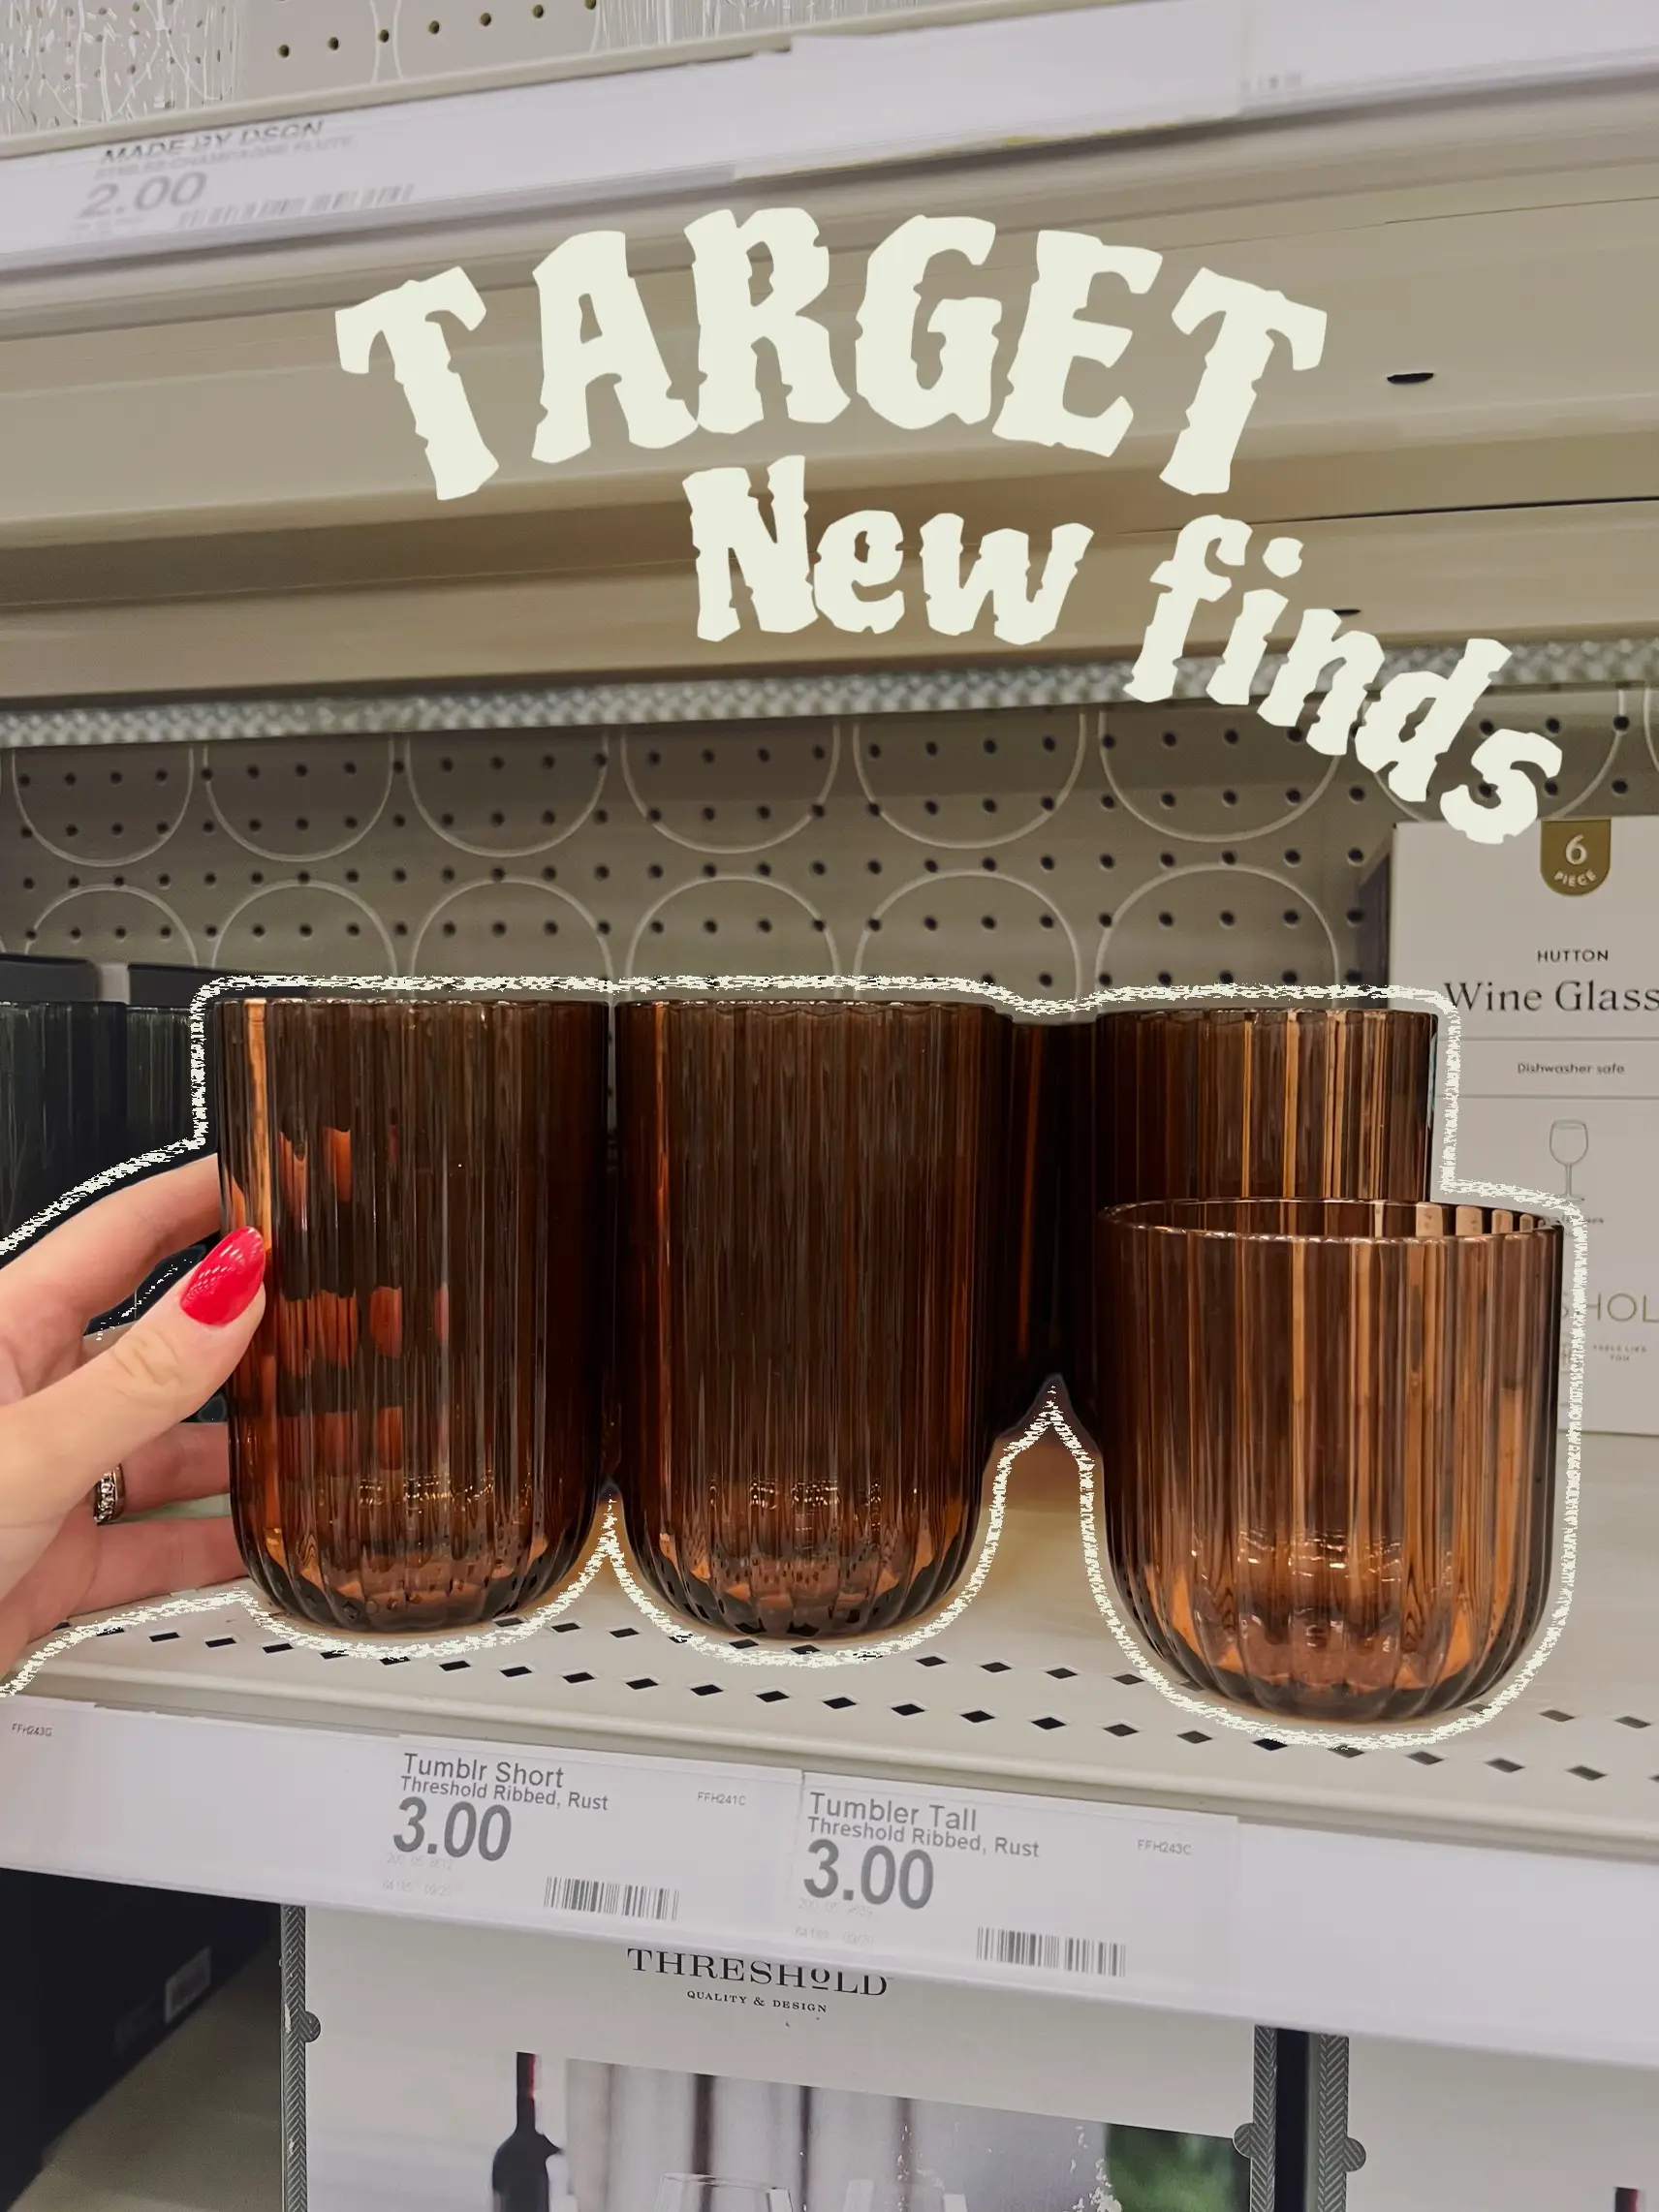 Target Tuesday, new kitchen finds!, Gallery posted by Avery J